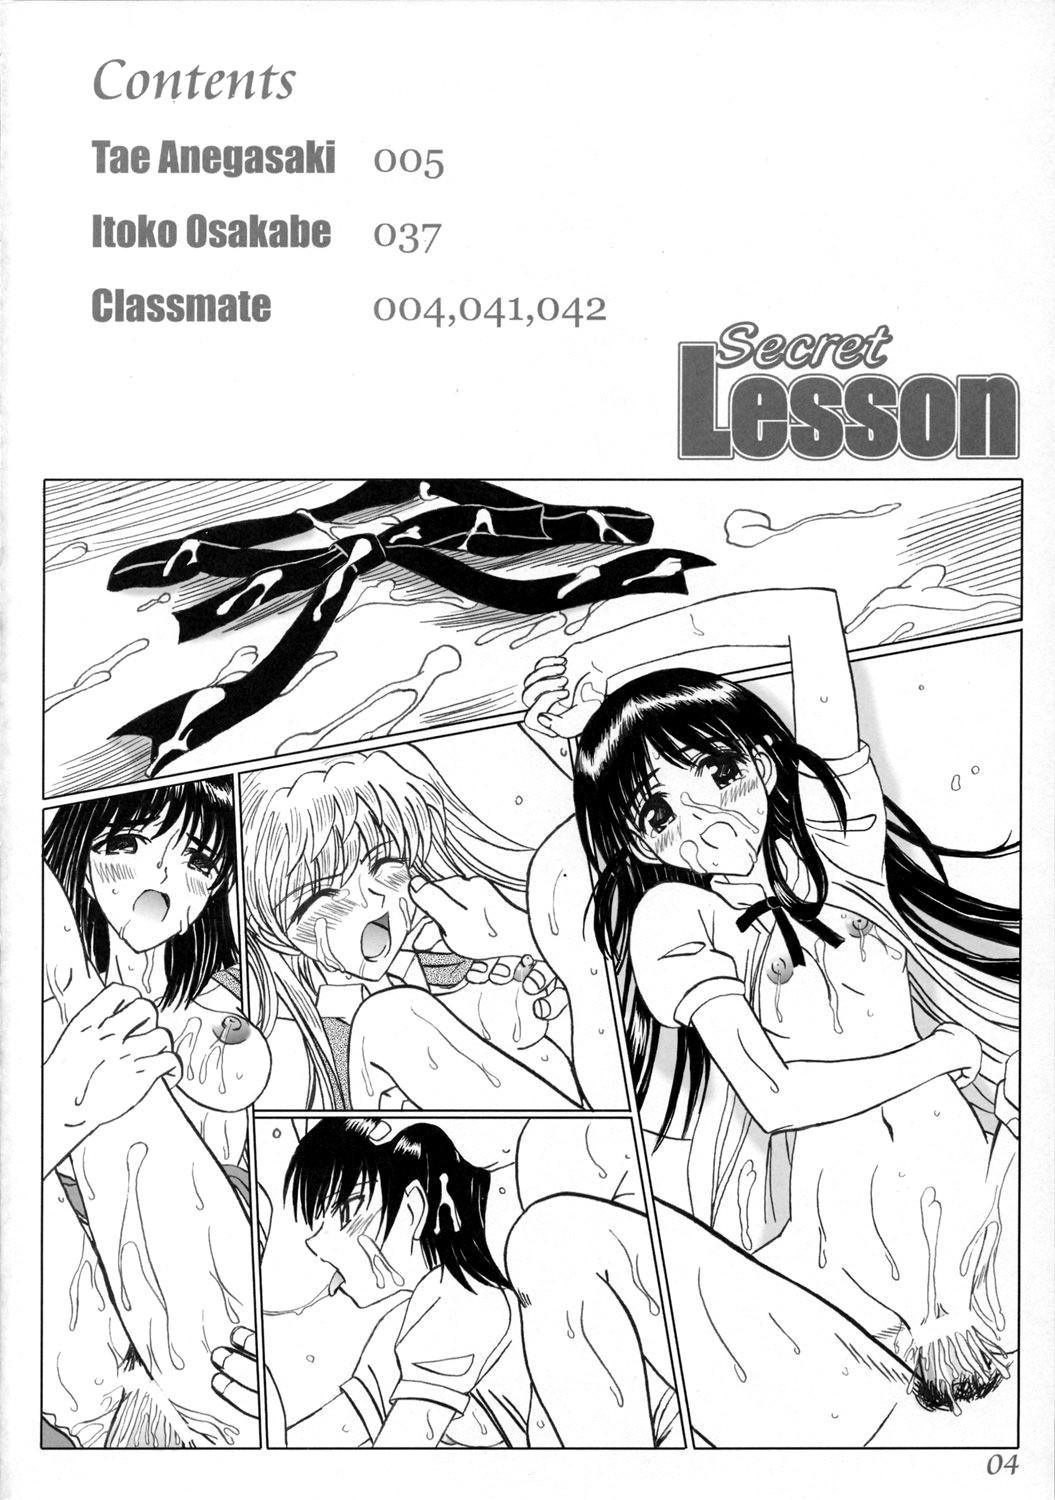 Foreplay Secret Lesson - School rumble Blacks - Page 3